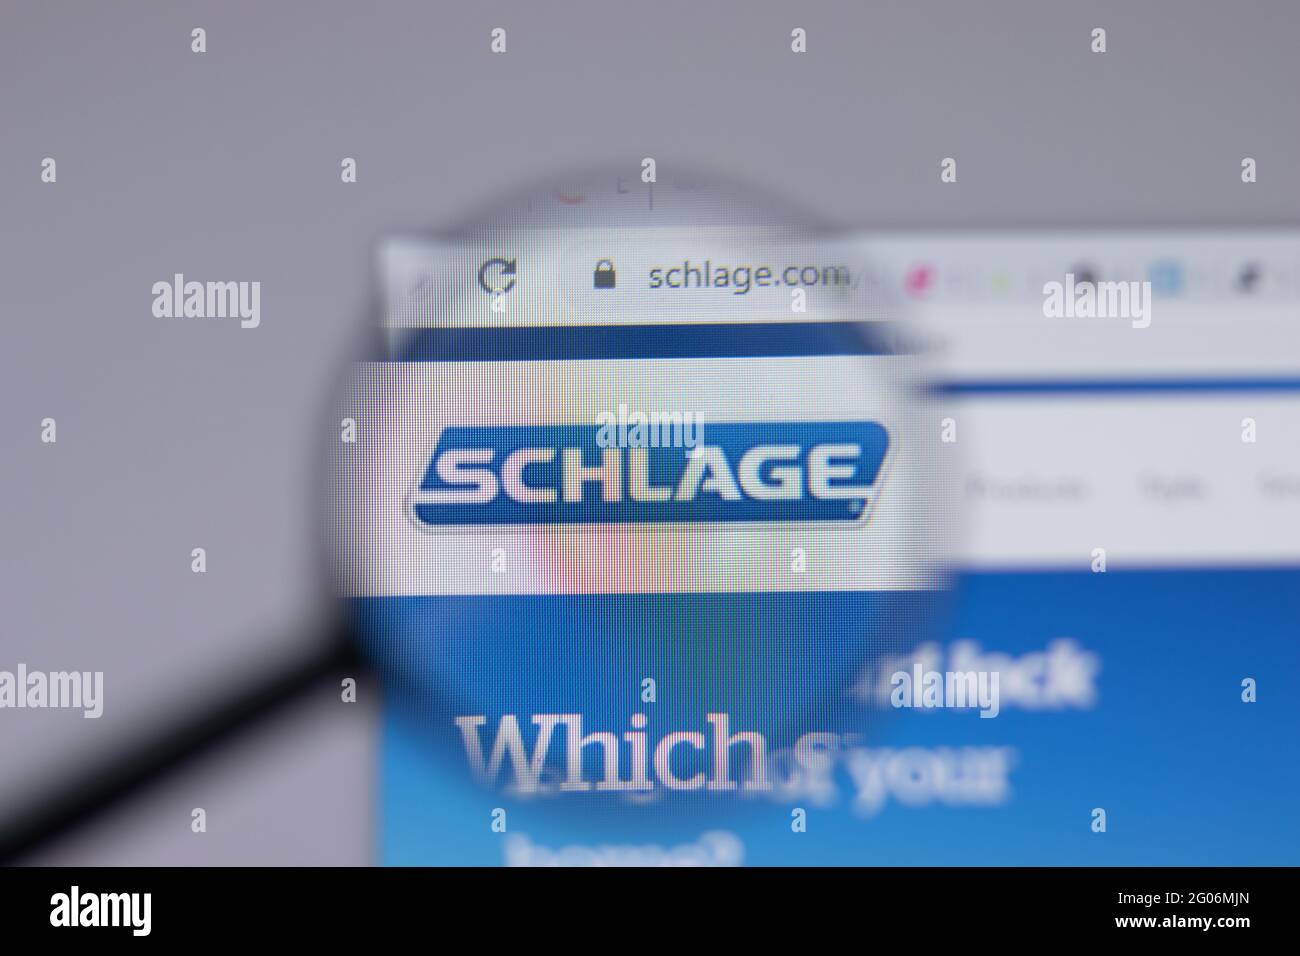 Los Angeles, California, USA - 1 June 2021: Schlage logo or icon on website page, Illustrative Editorial Stock Photo